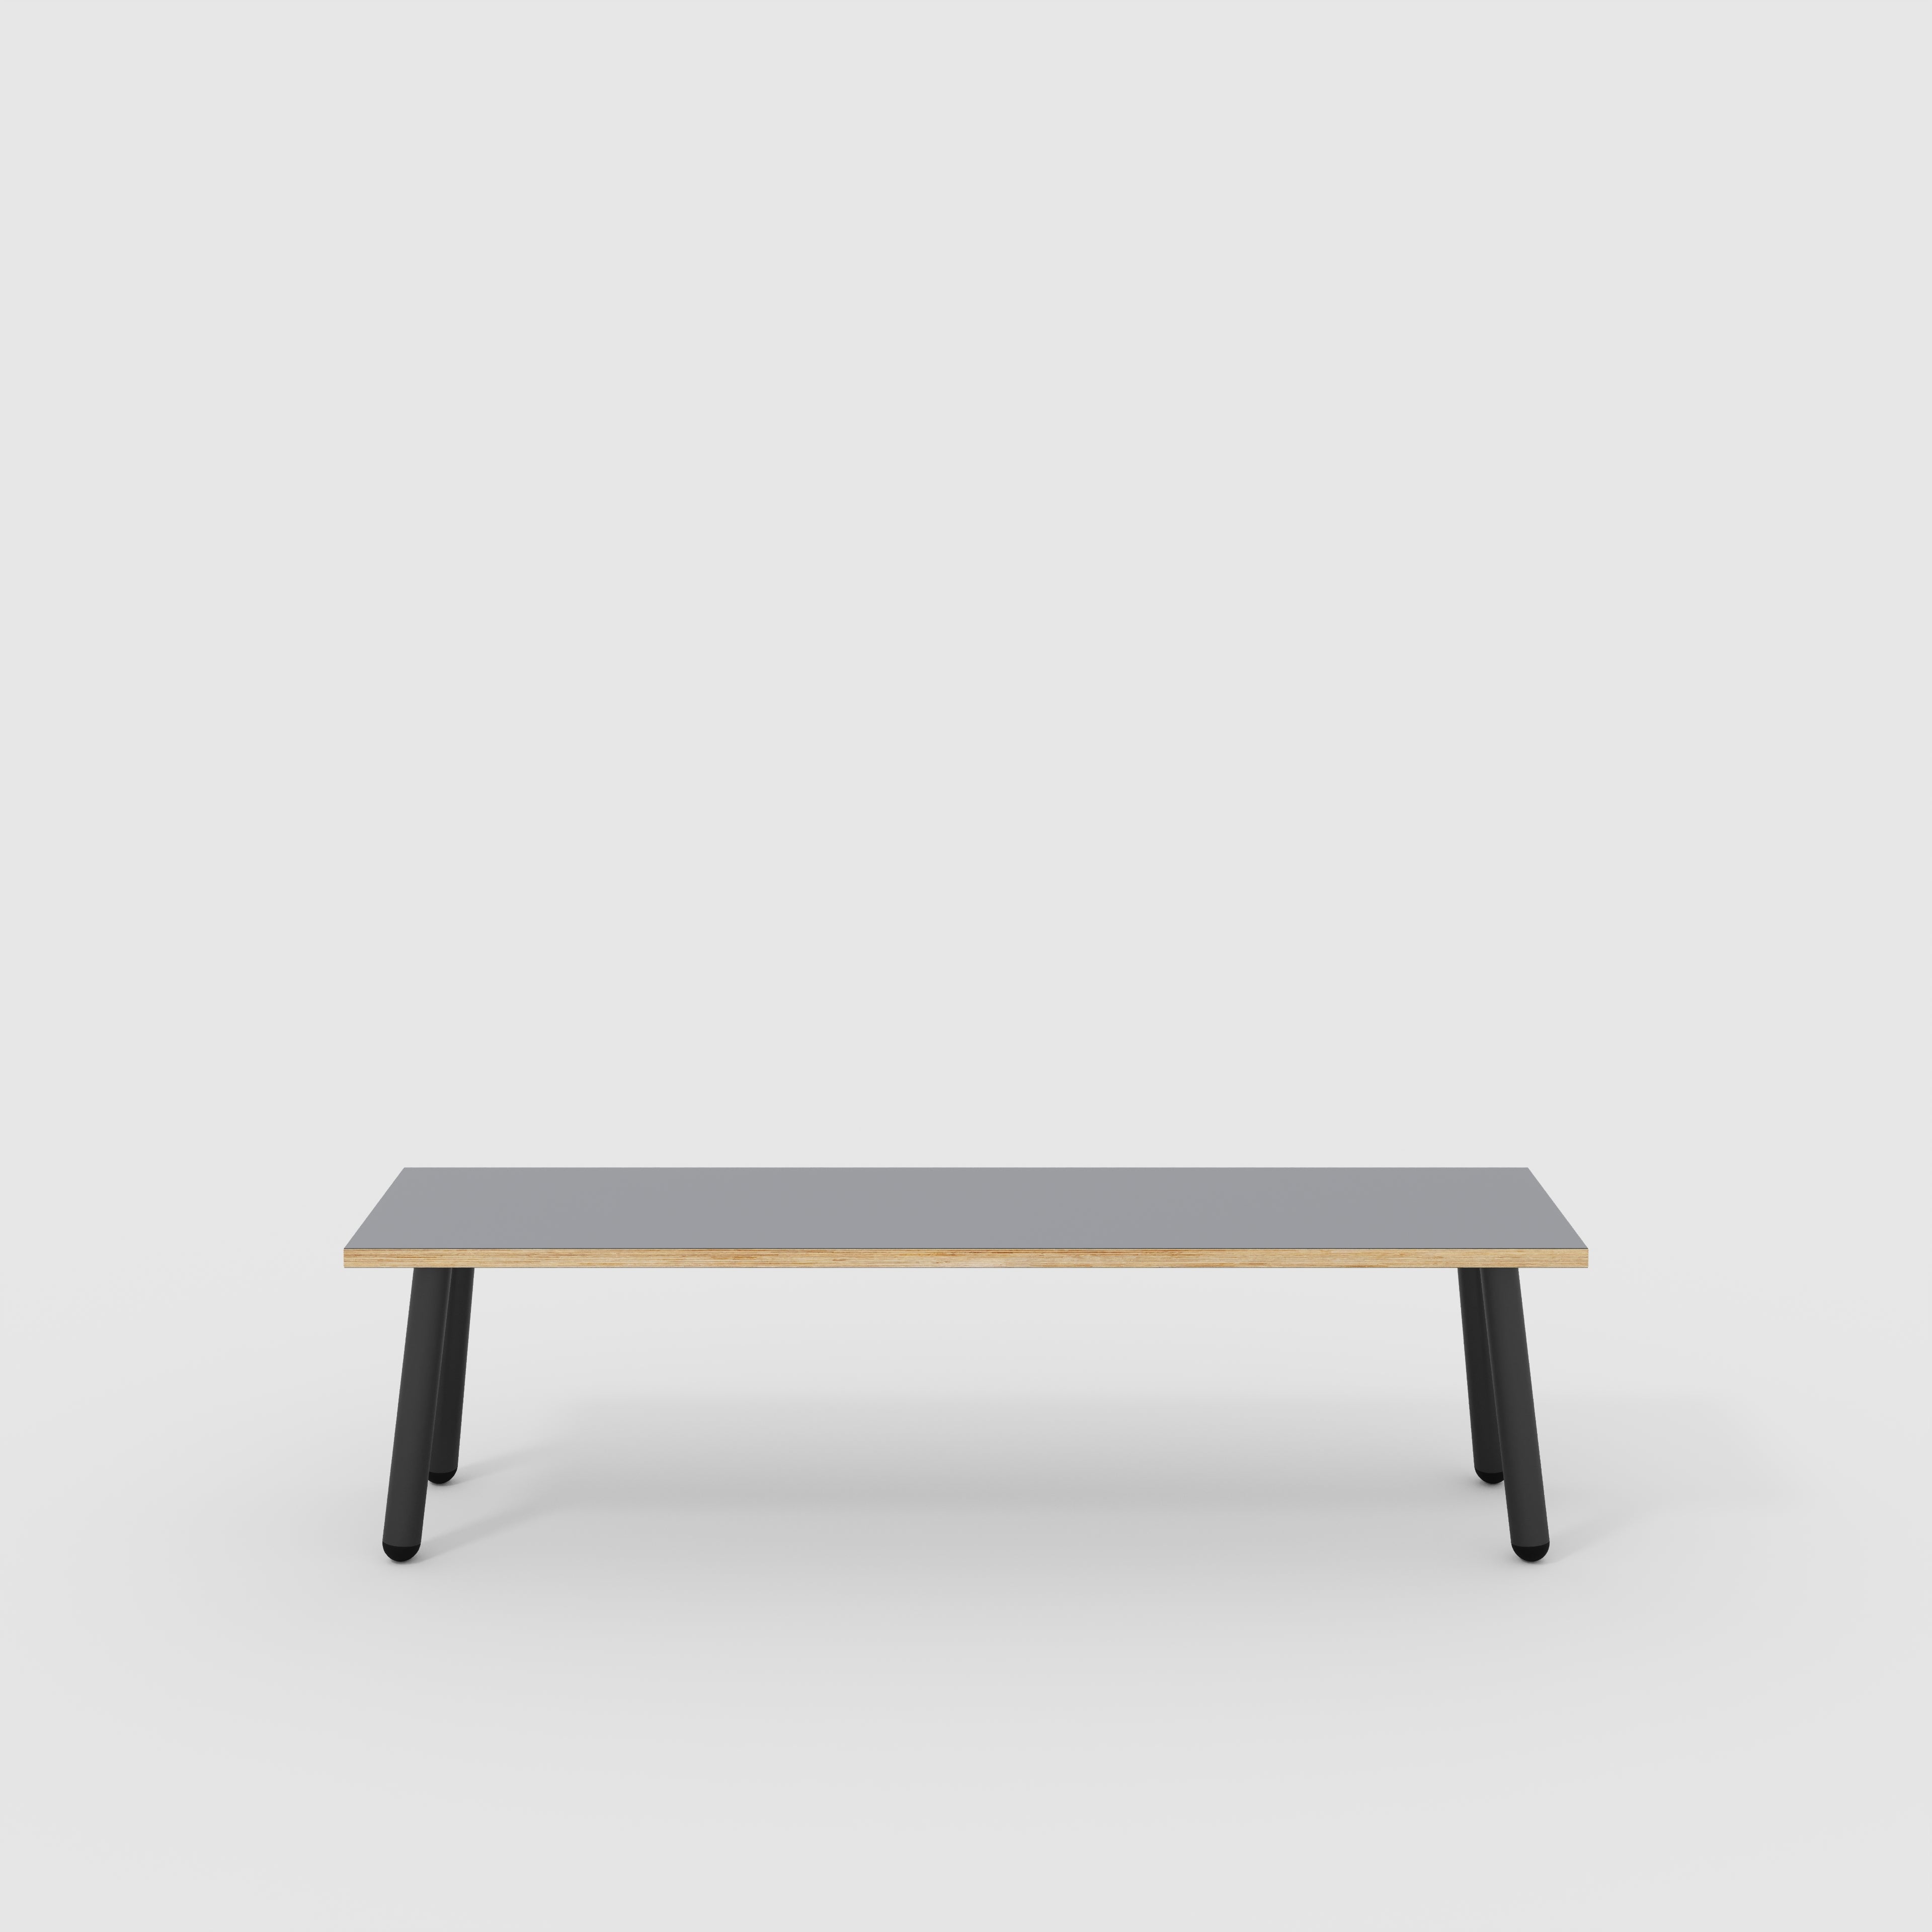 Bench Seat with Black Round Single Pin Legs - Formica Tornado Grey - 1600(w) x 400(d)